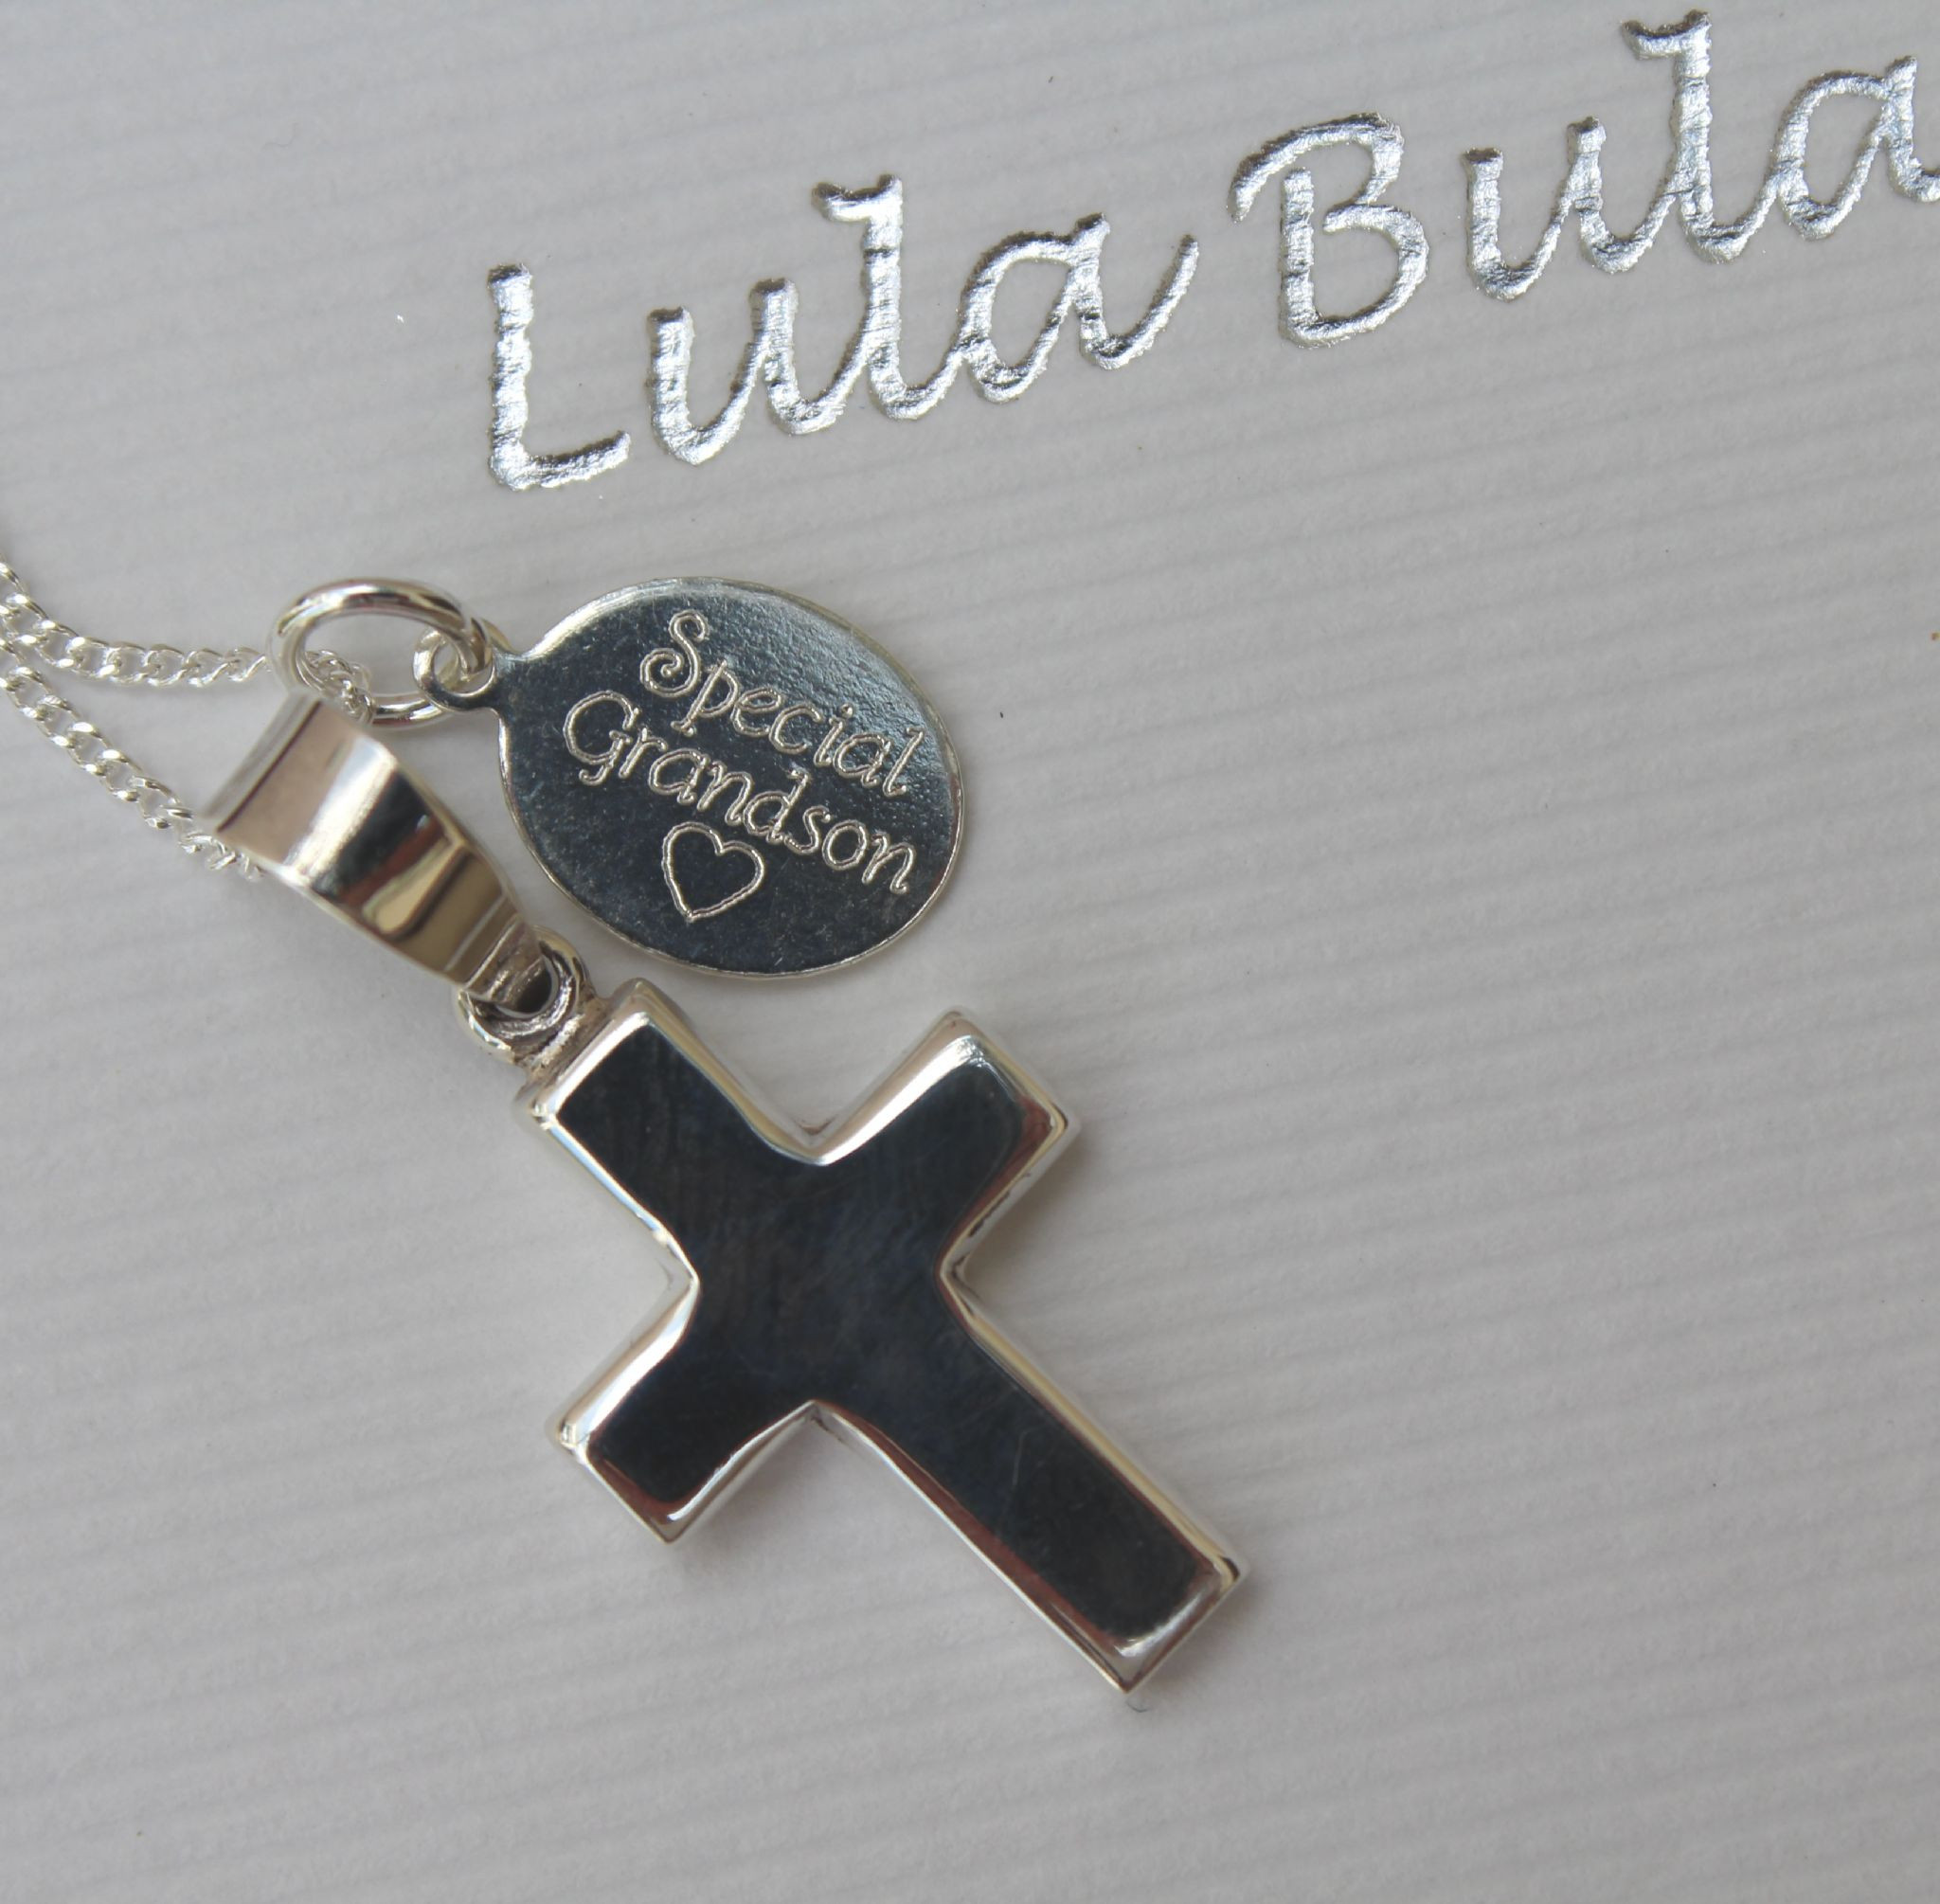 First Communion Gift Ideas Boys
 First Holy munion boy s t with personalised tag necklace